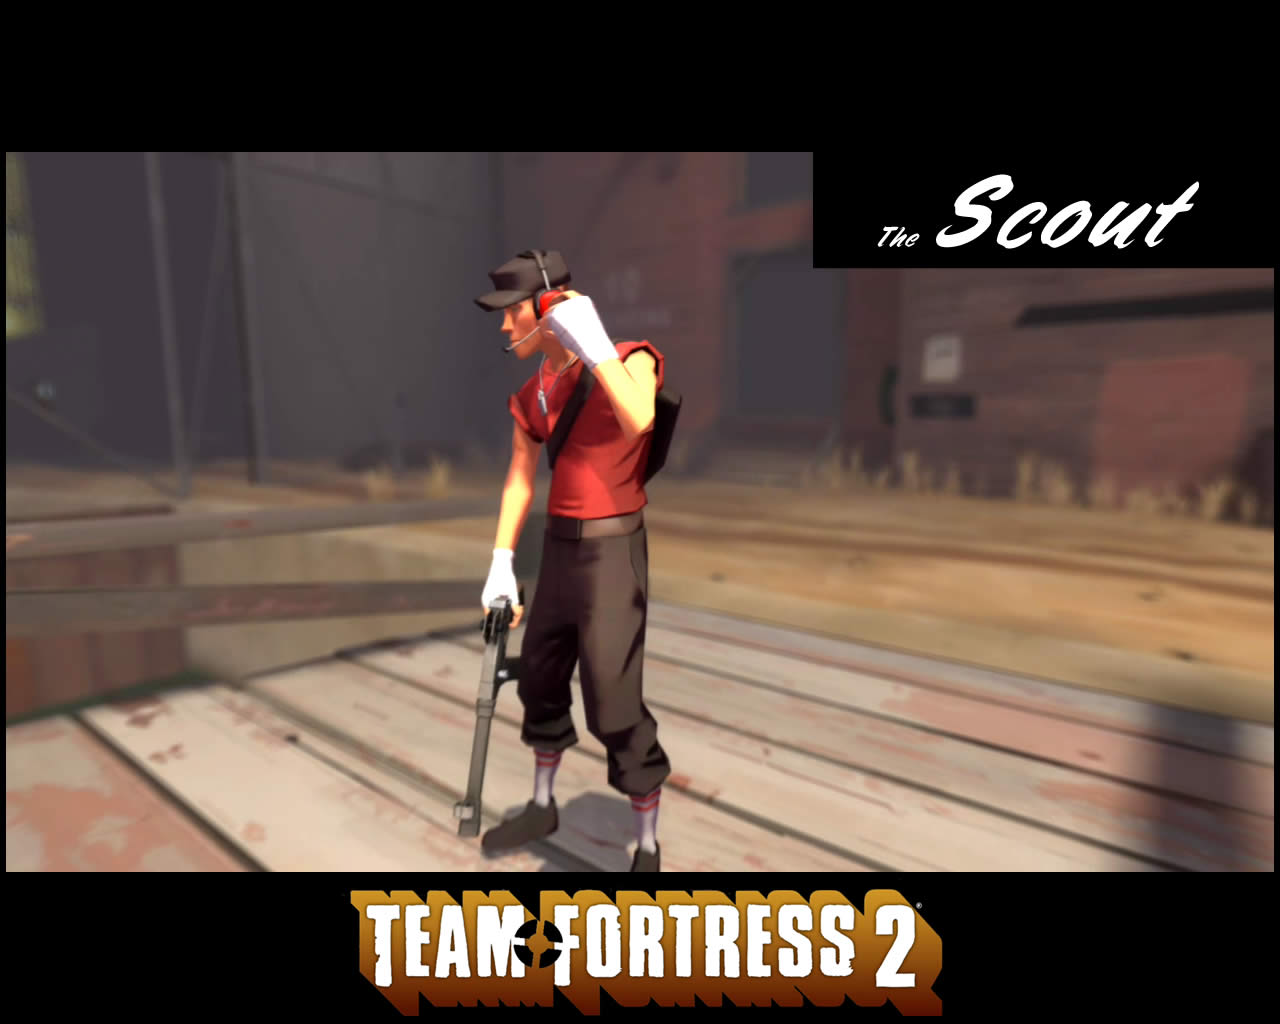 team fortress 2, scout (team fortress), video game